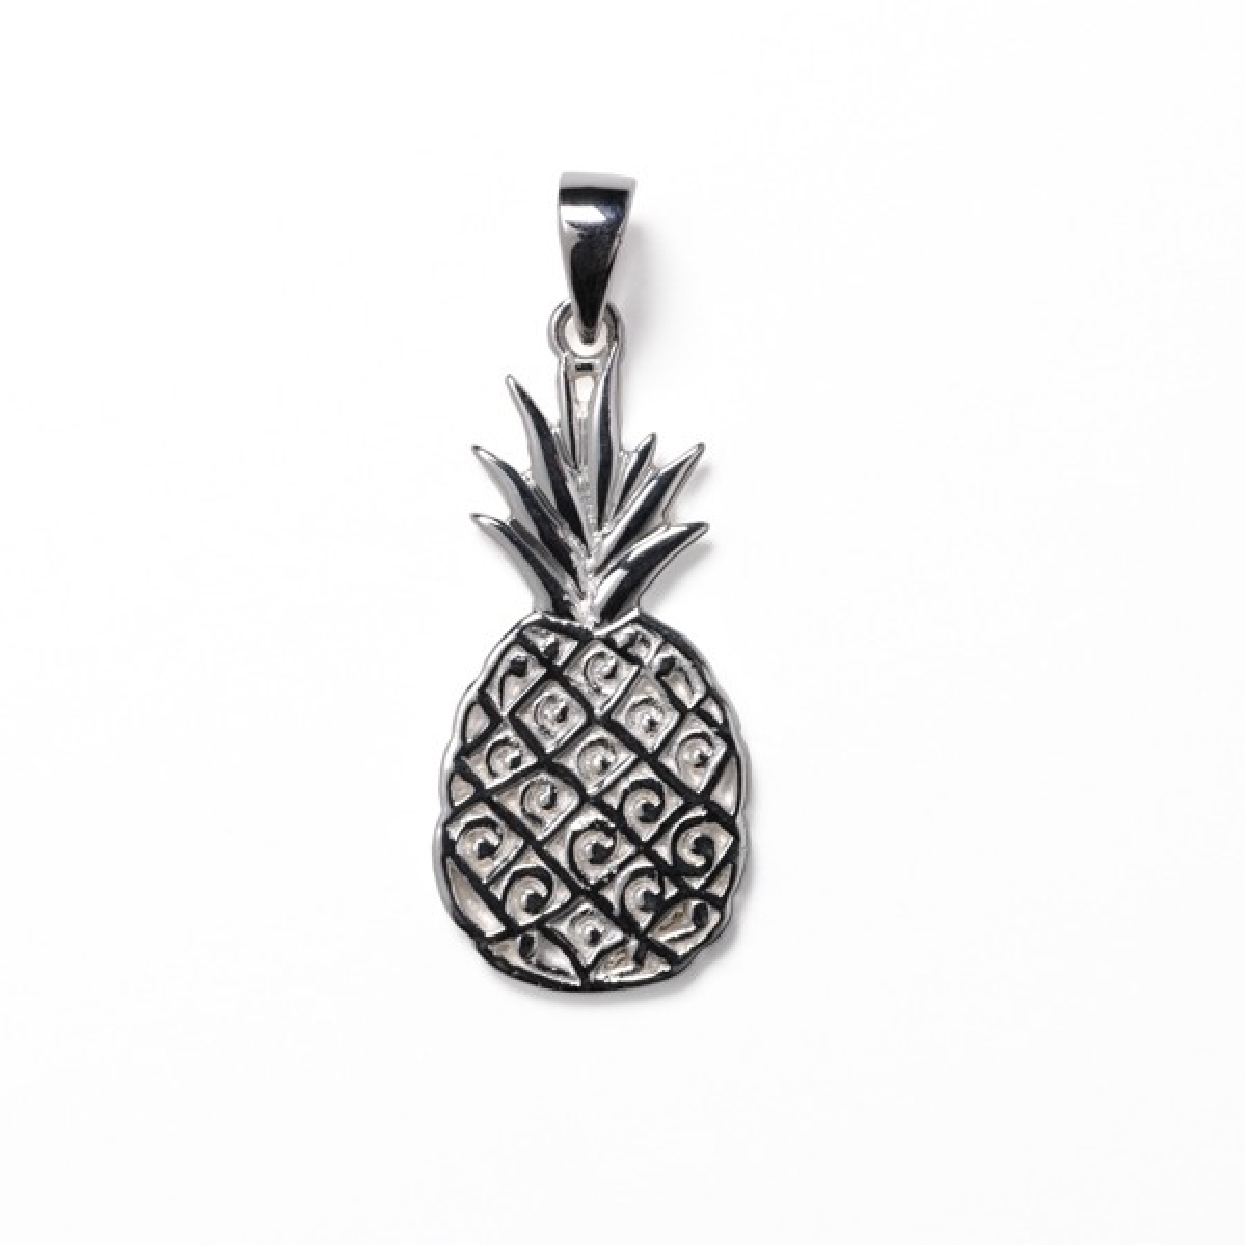 Southern Gates Waterfront Pineapple Pendant. Lowcountry Series. P988